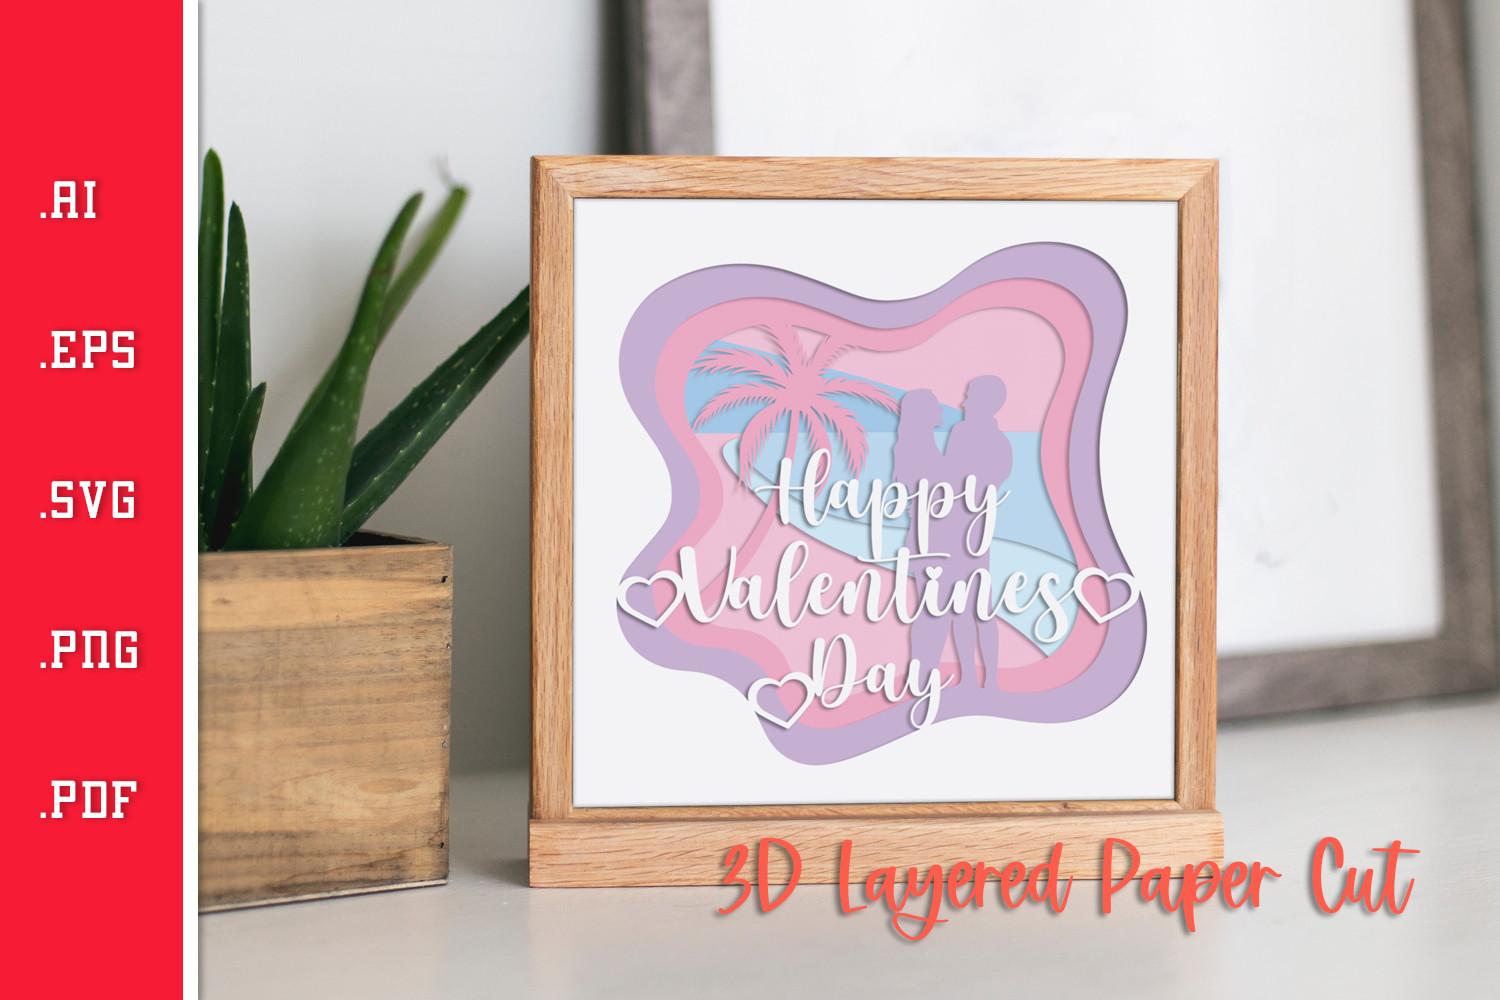 Happy Valentines Day 5 - 3D Paper Cut